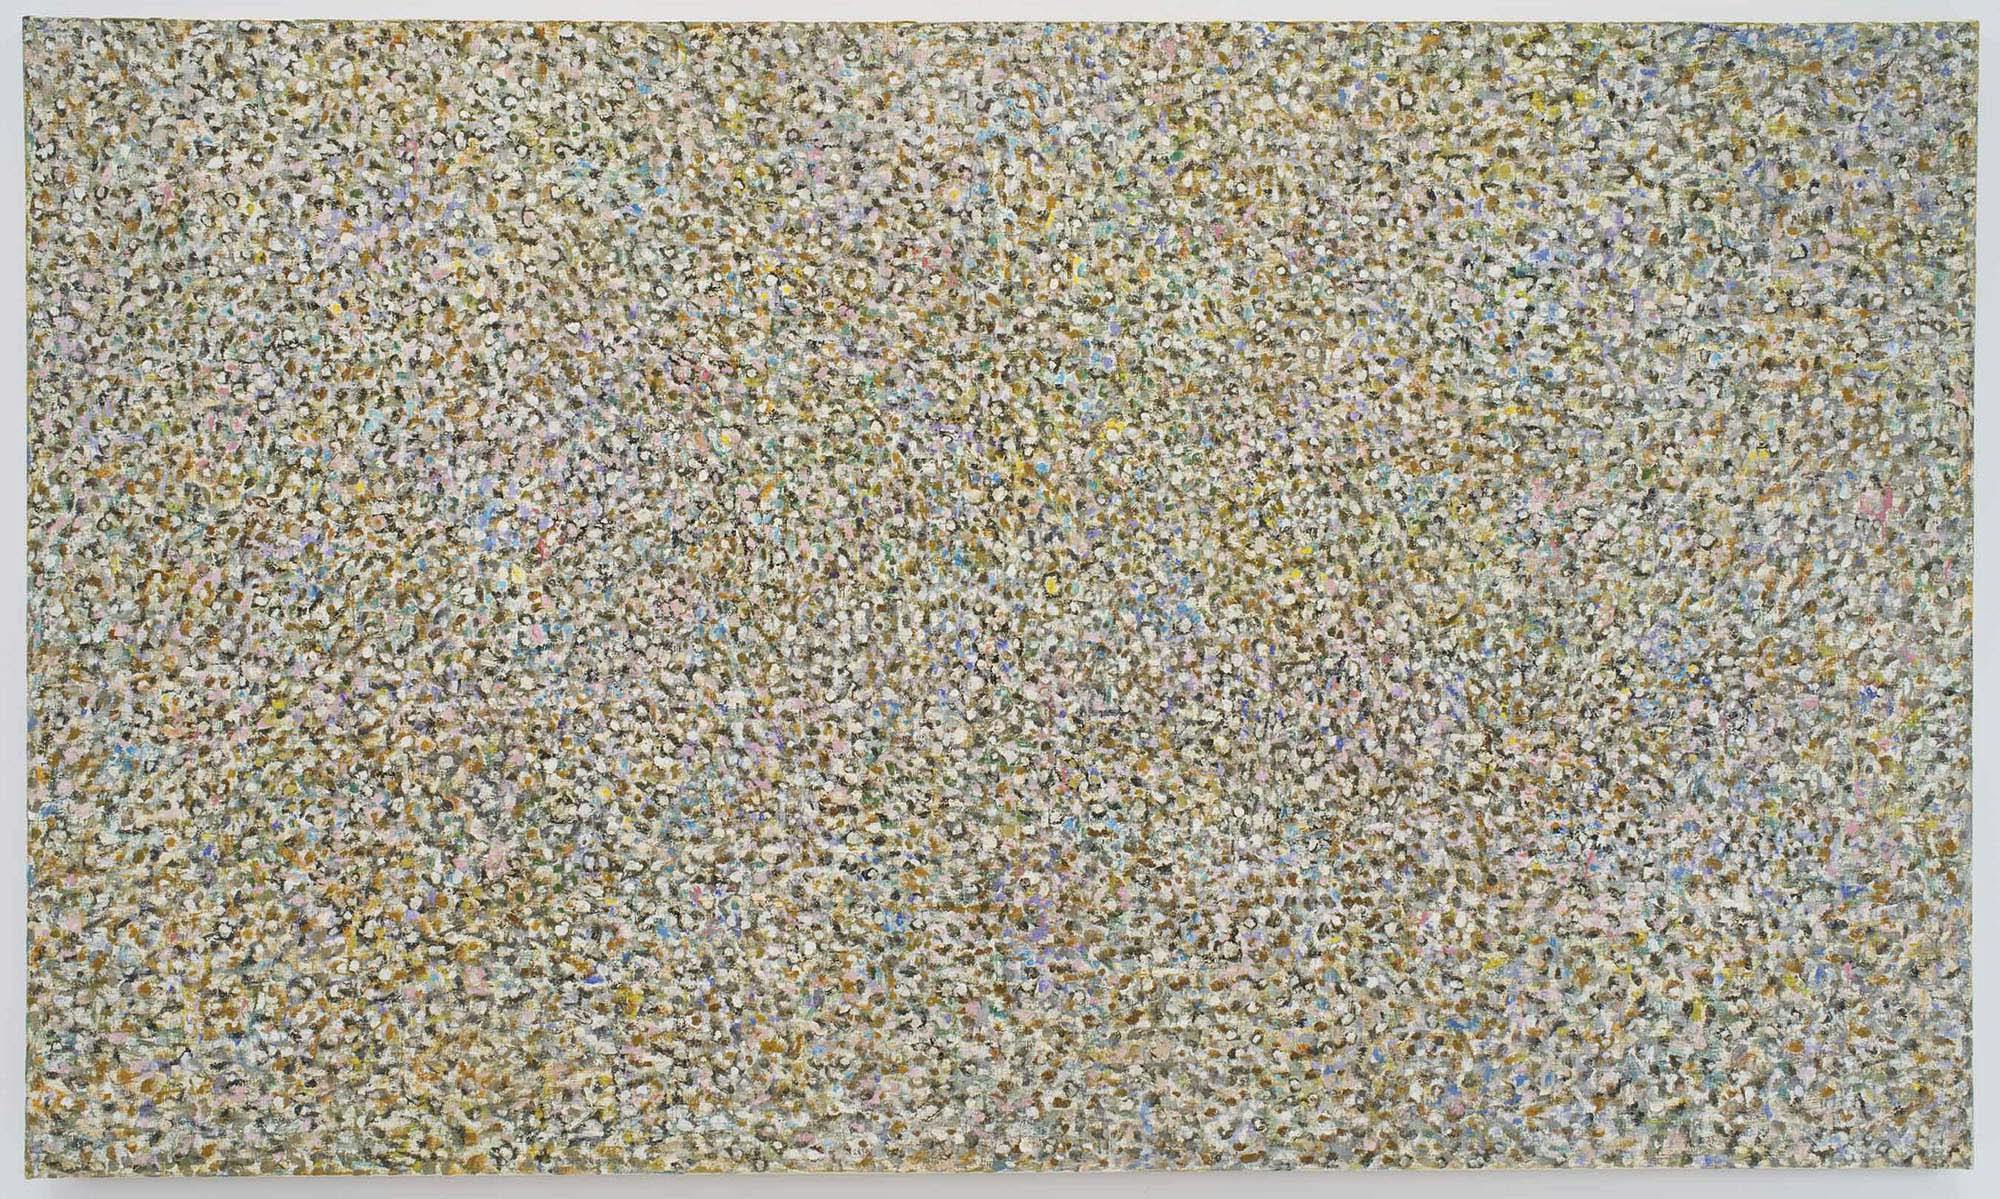 Magnetic Space
1962
Oil on linen
79 x 116 in. (200.7 x 294.6 cm)
 – The Richard Pousette-Dart Foundation